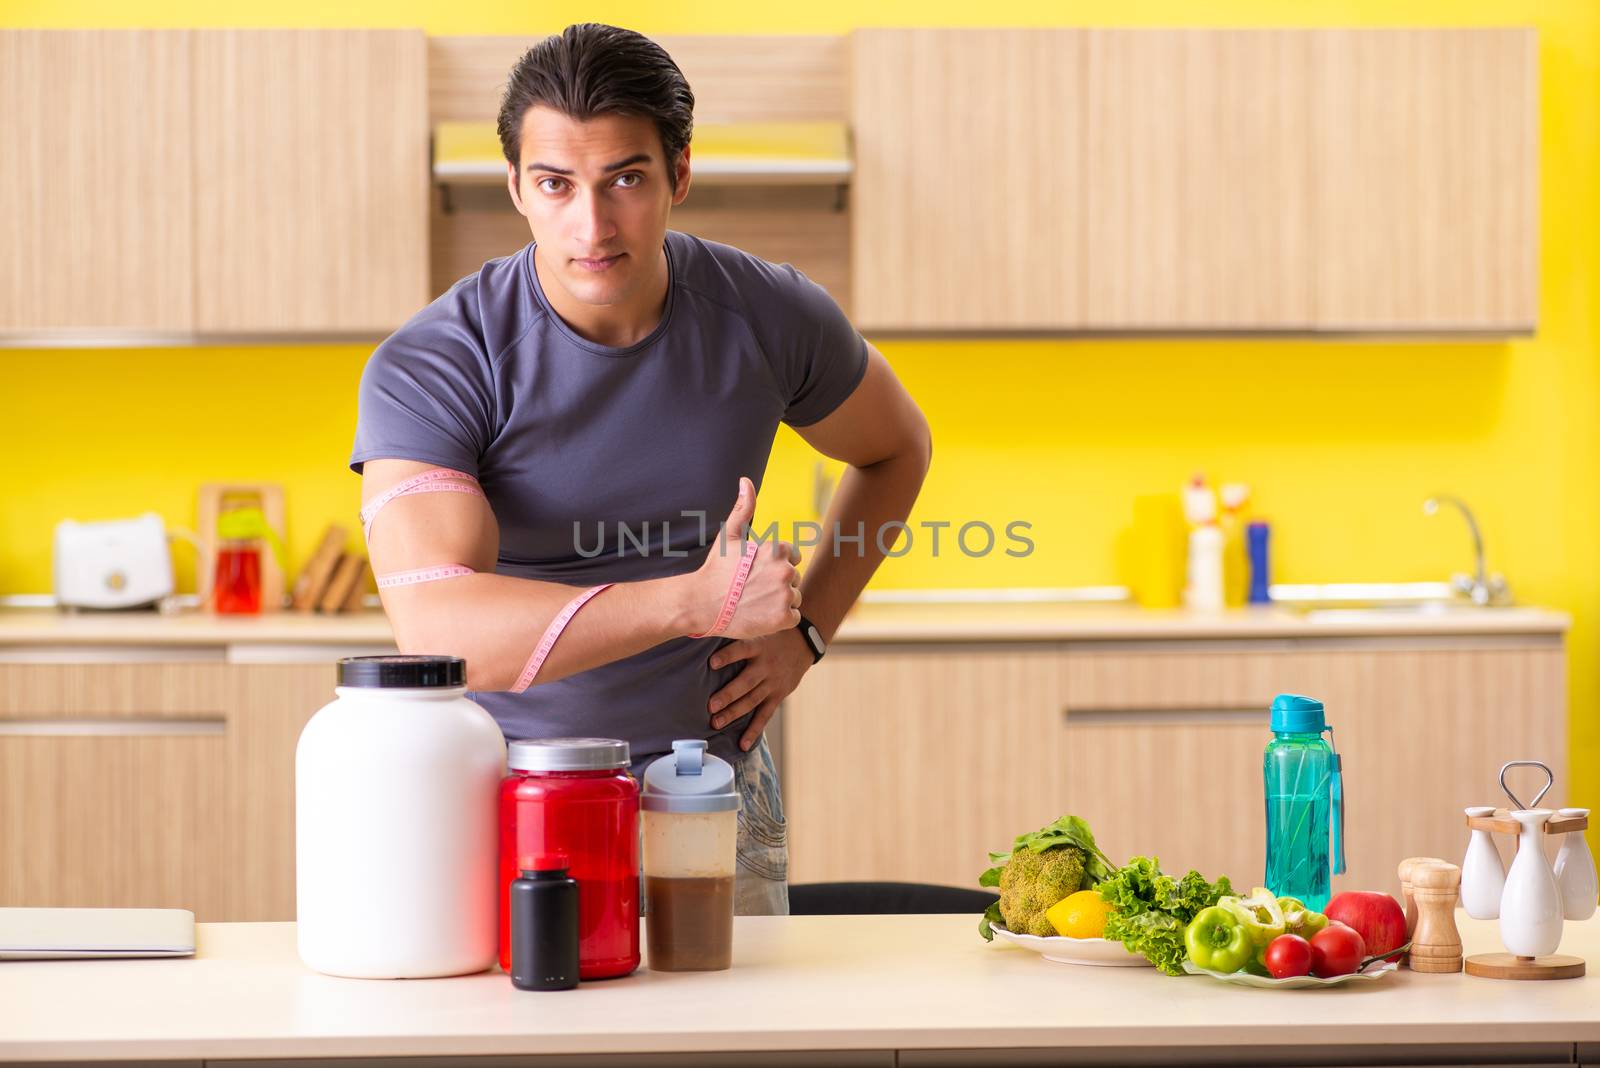 Young man in healthy eating concept